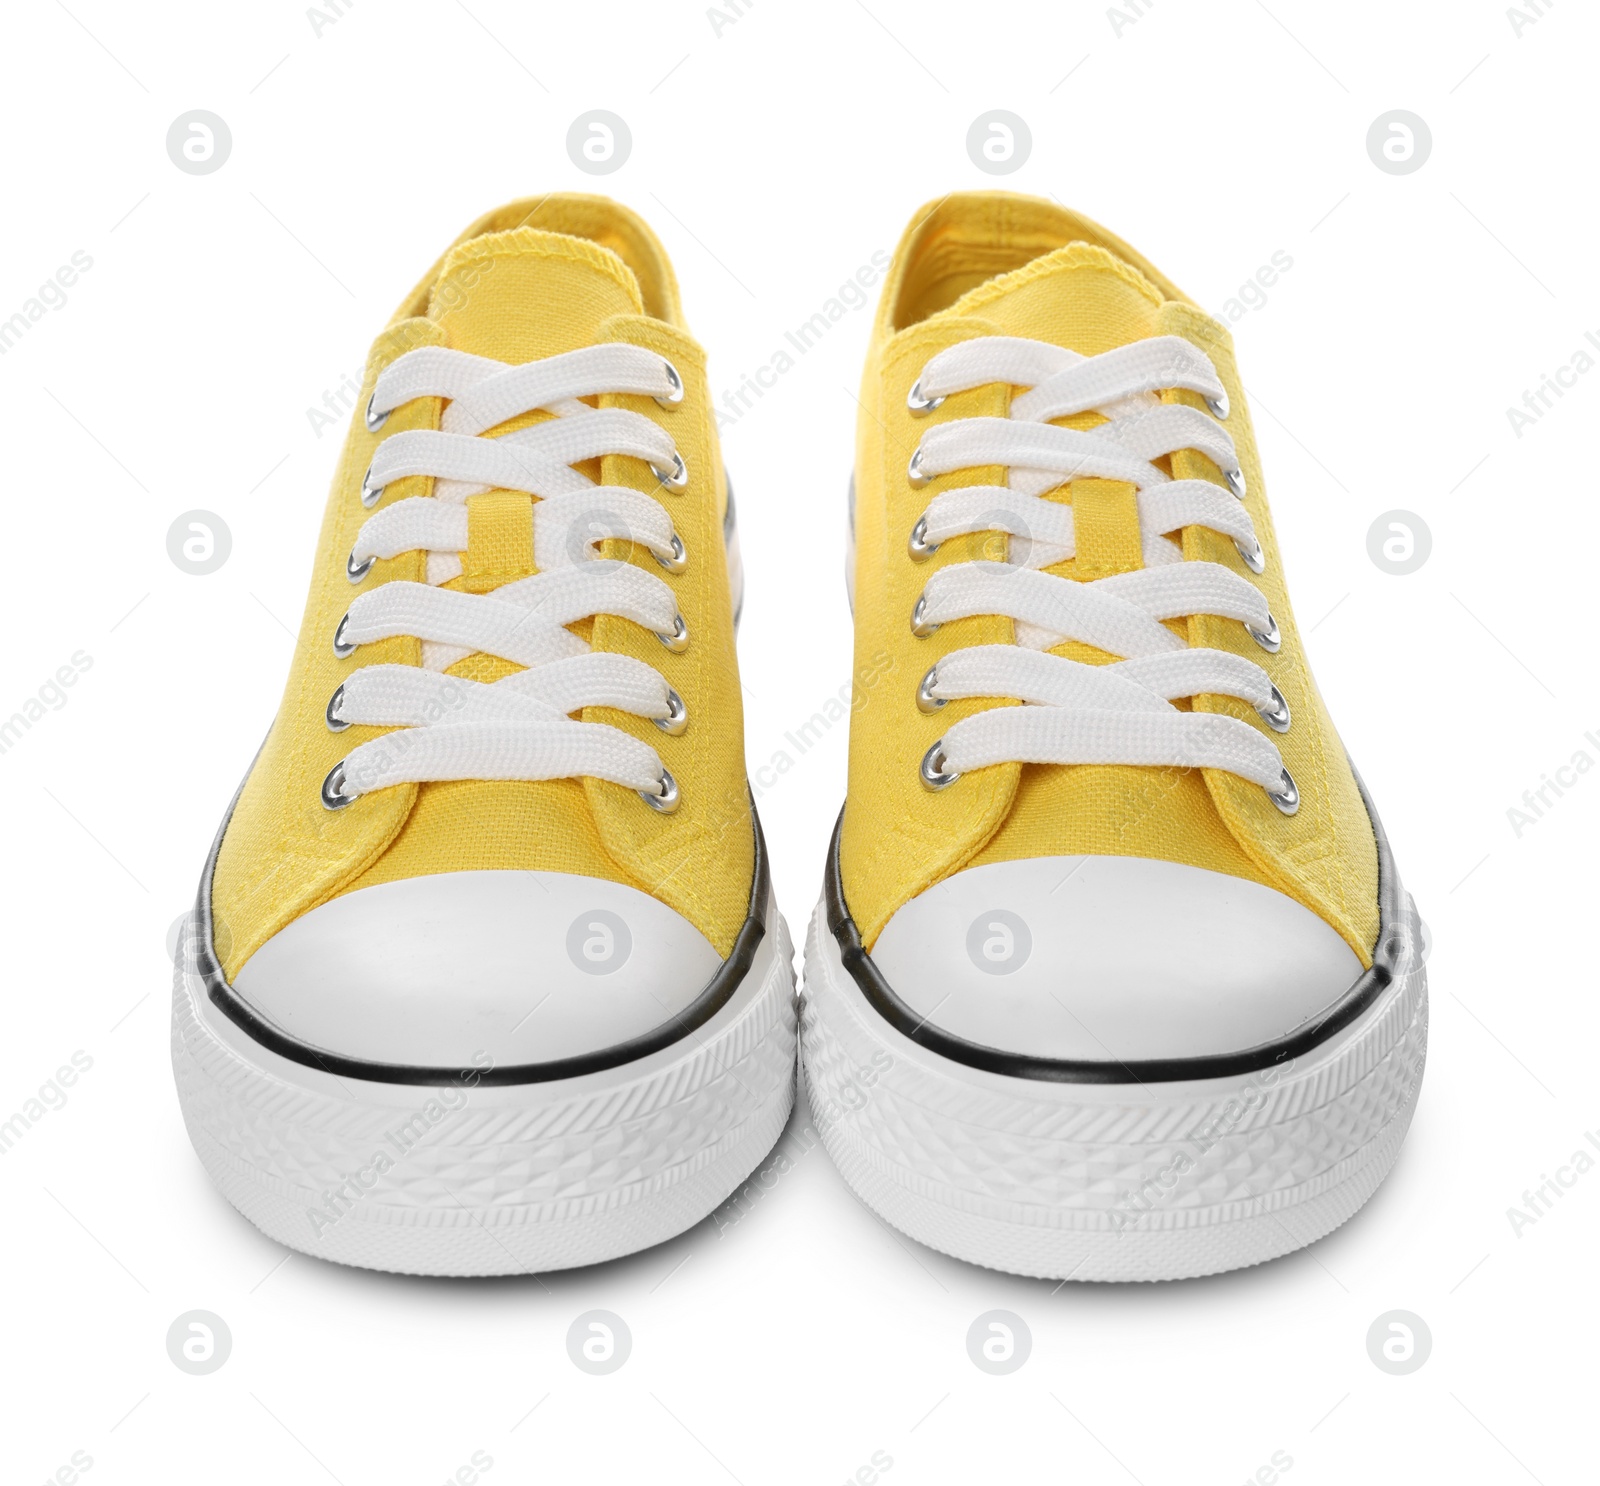 Photo of Pair of yellow classic old school sneakers on white background